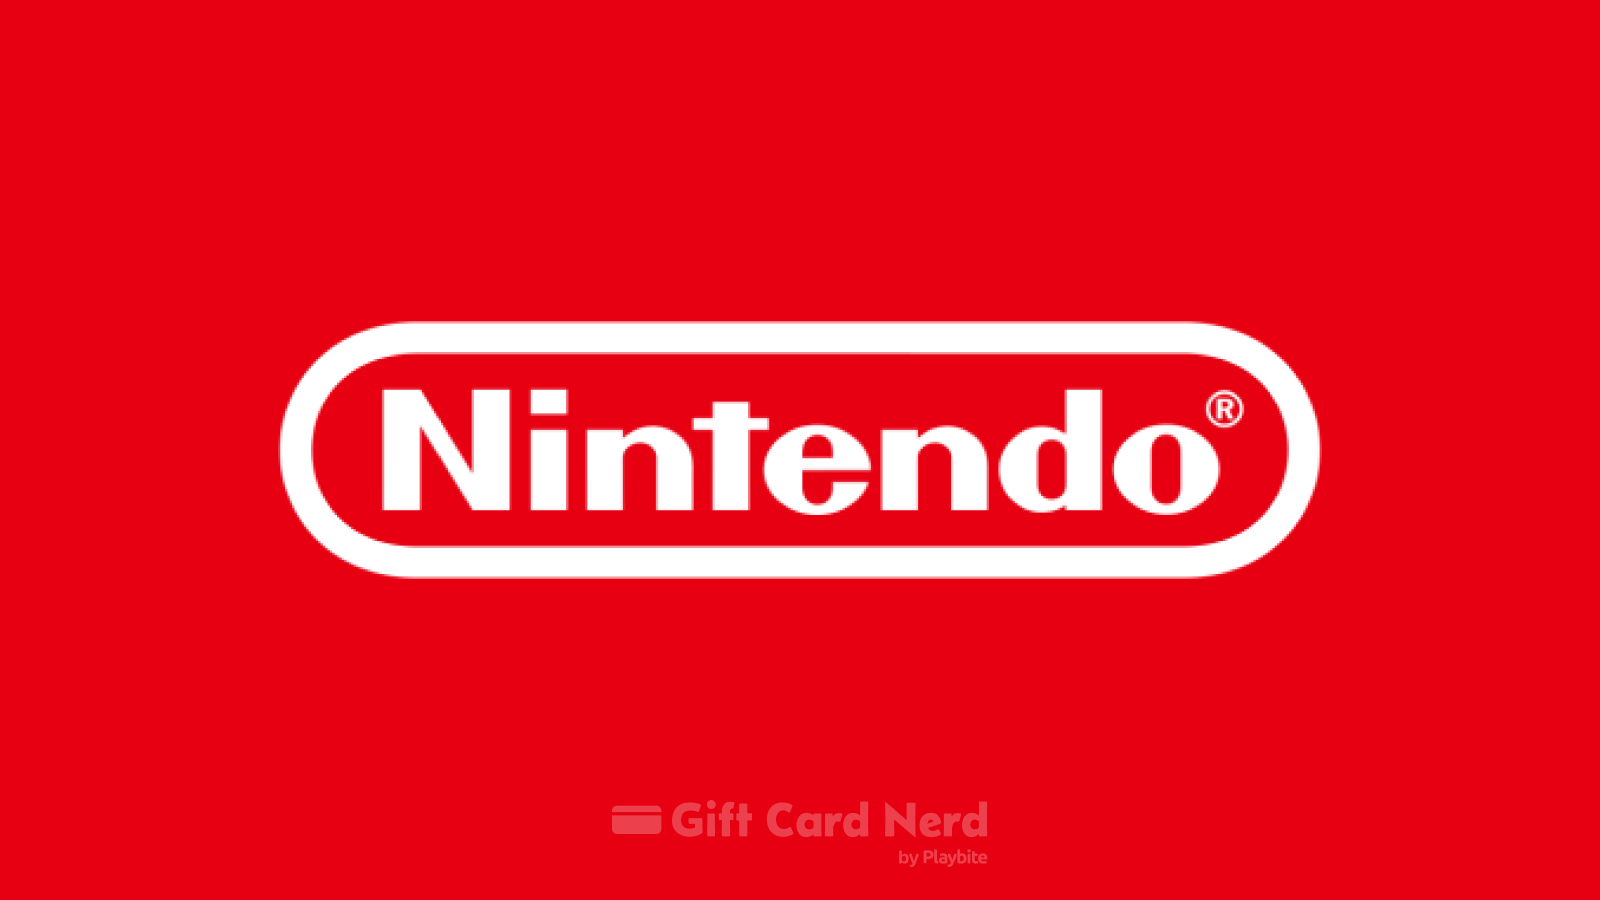 Does Game Stop Sell Nintendo Gift Cards?